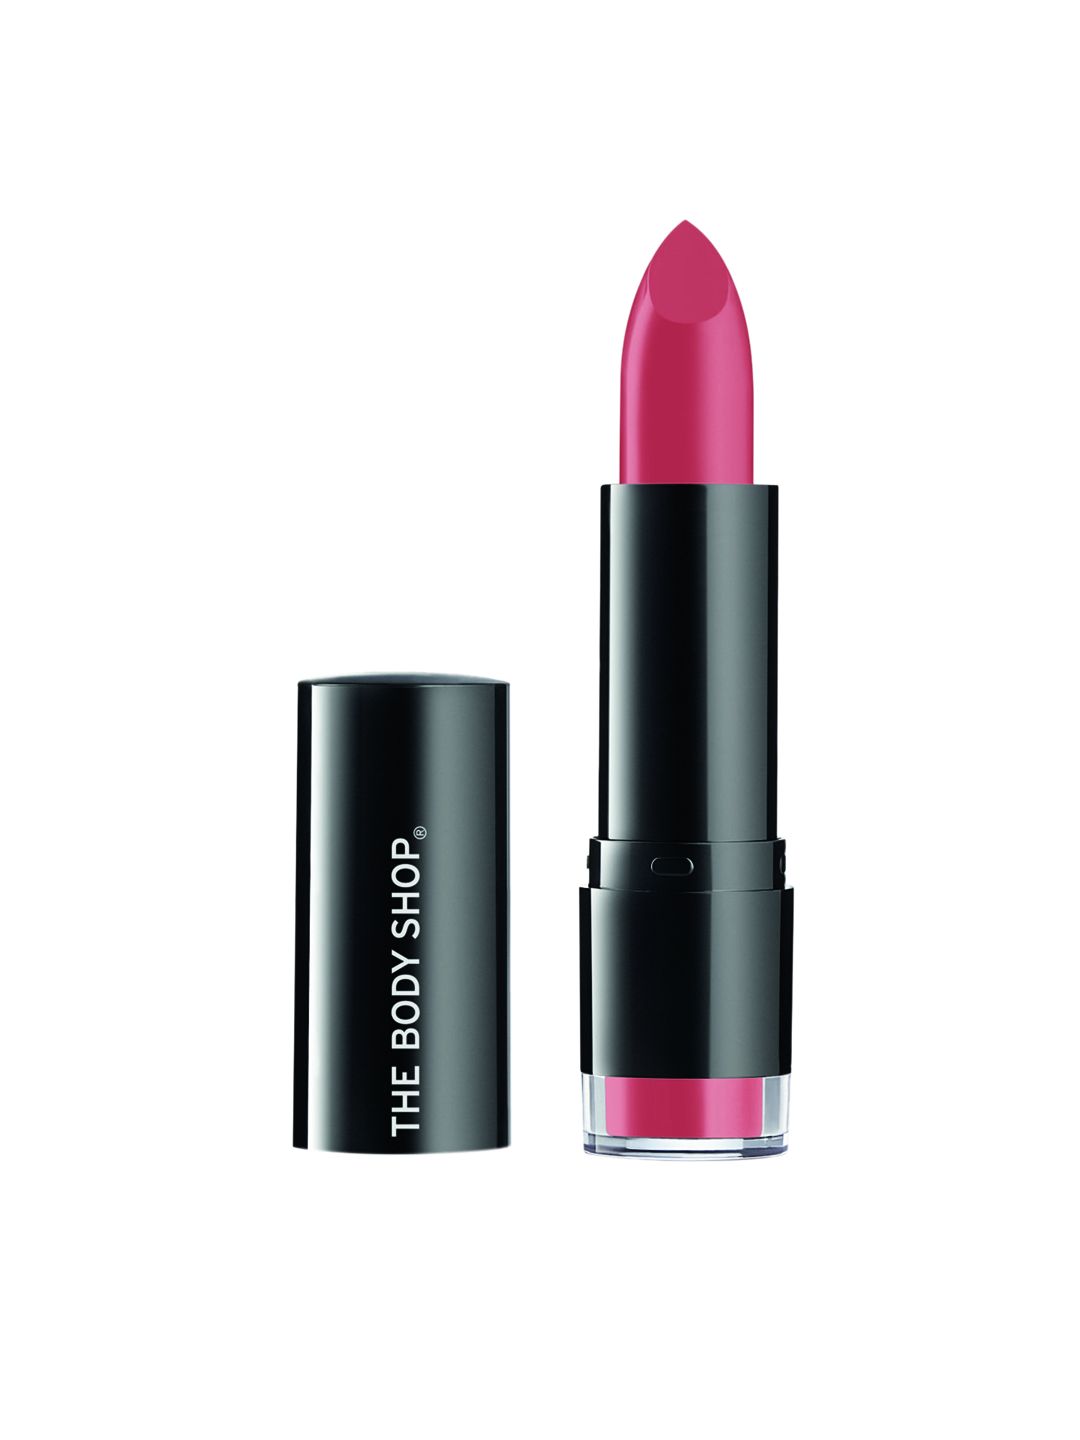 THE BODY SHOP Colour Crush Sustainable Lipstick - Berlin Oleander 210 Price in India